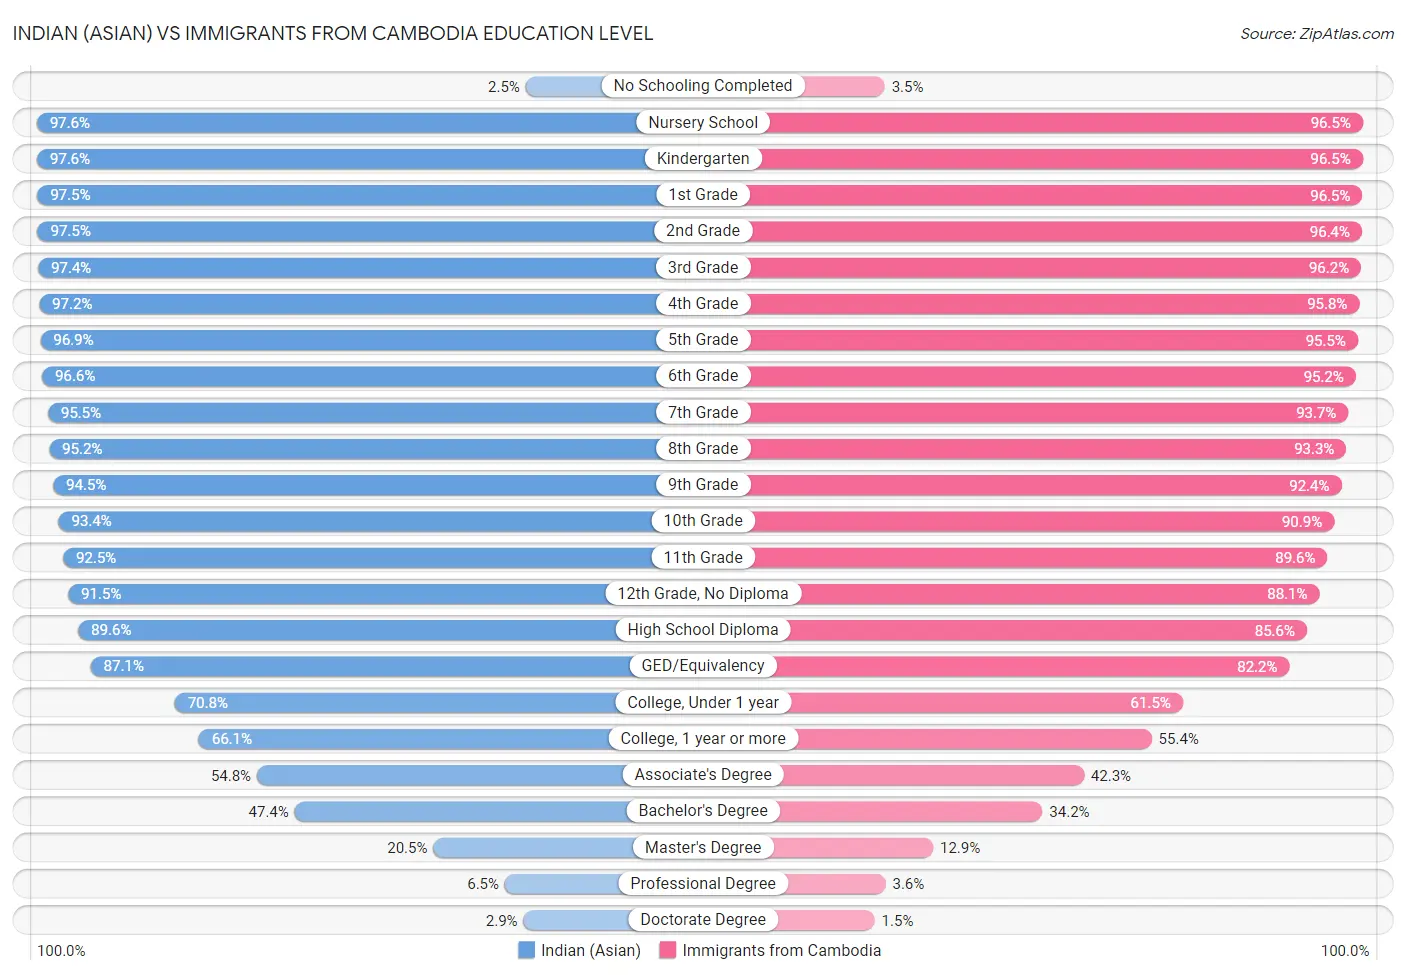 Indian (Asian) vs Immigrants from Cambodia Education Level